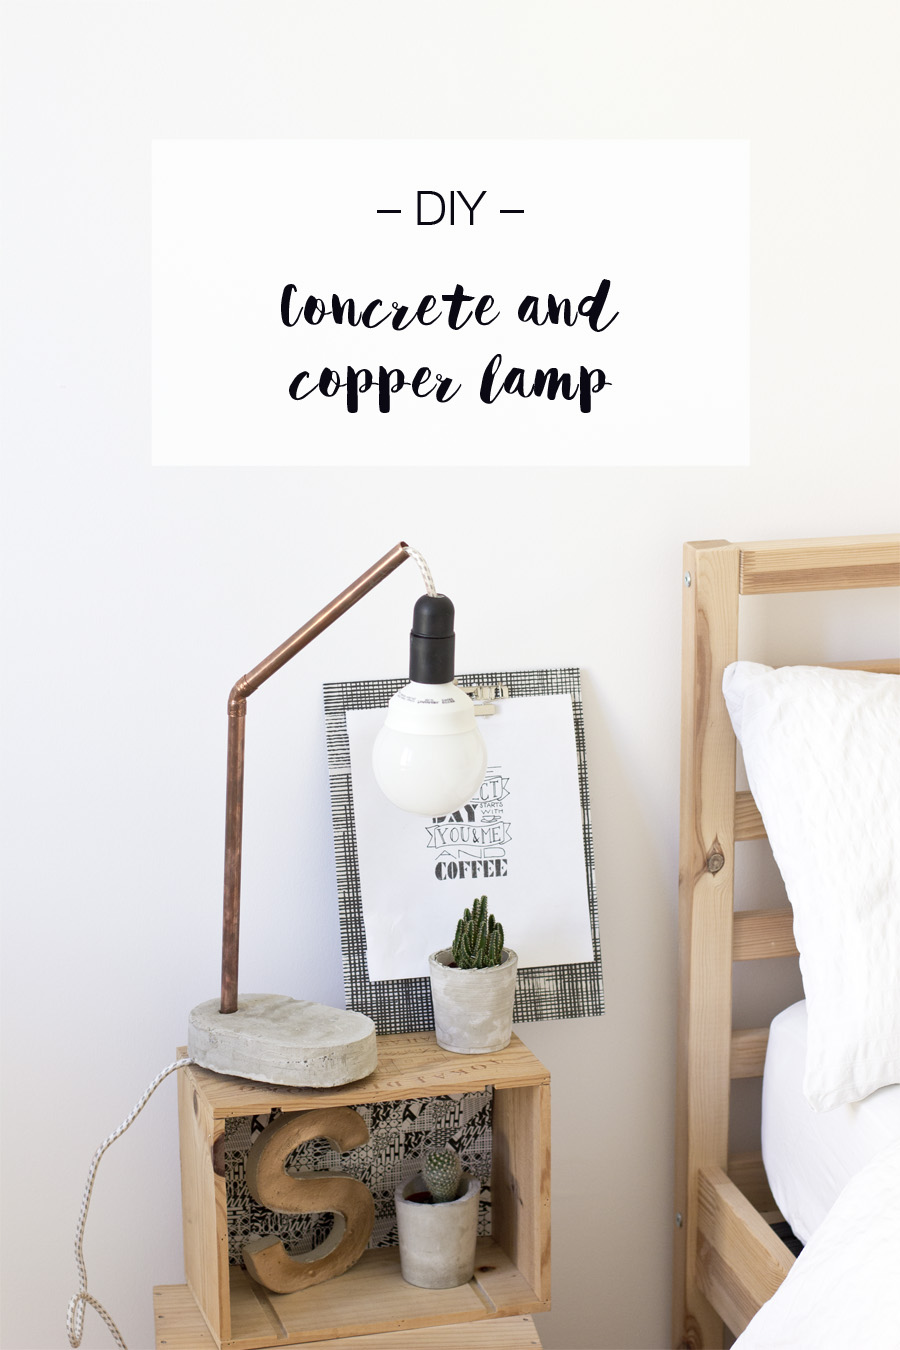 Concrete and copper lamp | LOOK WHAT I MADE ...